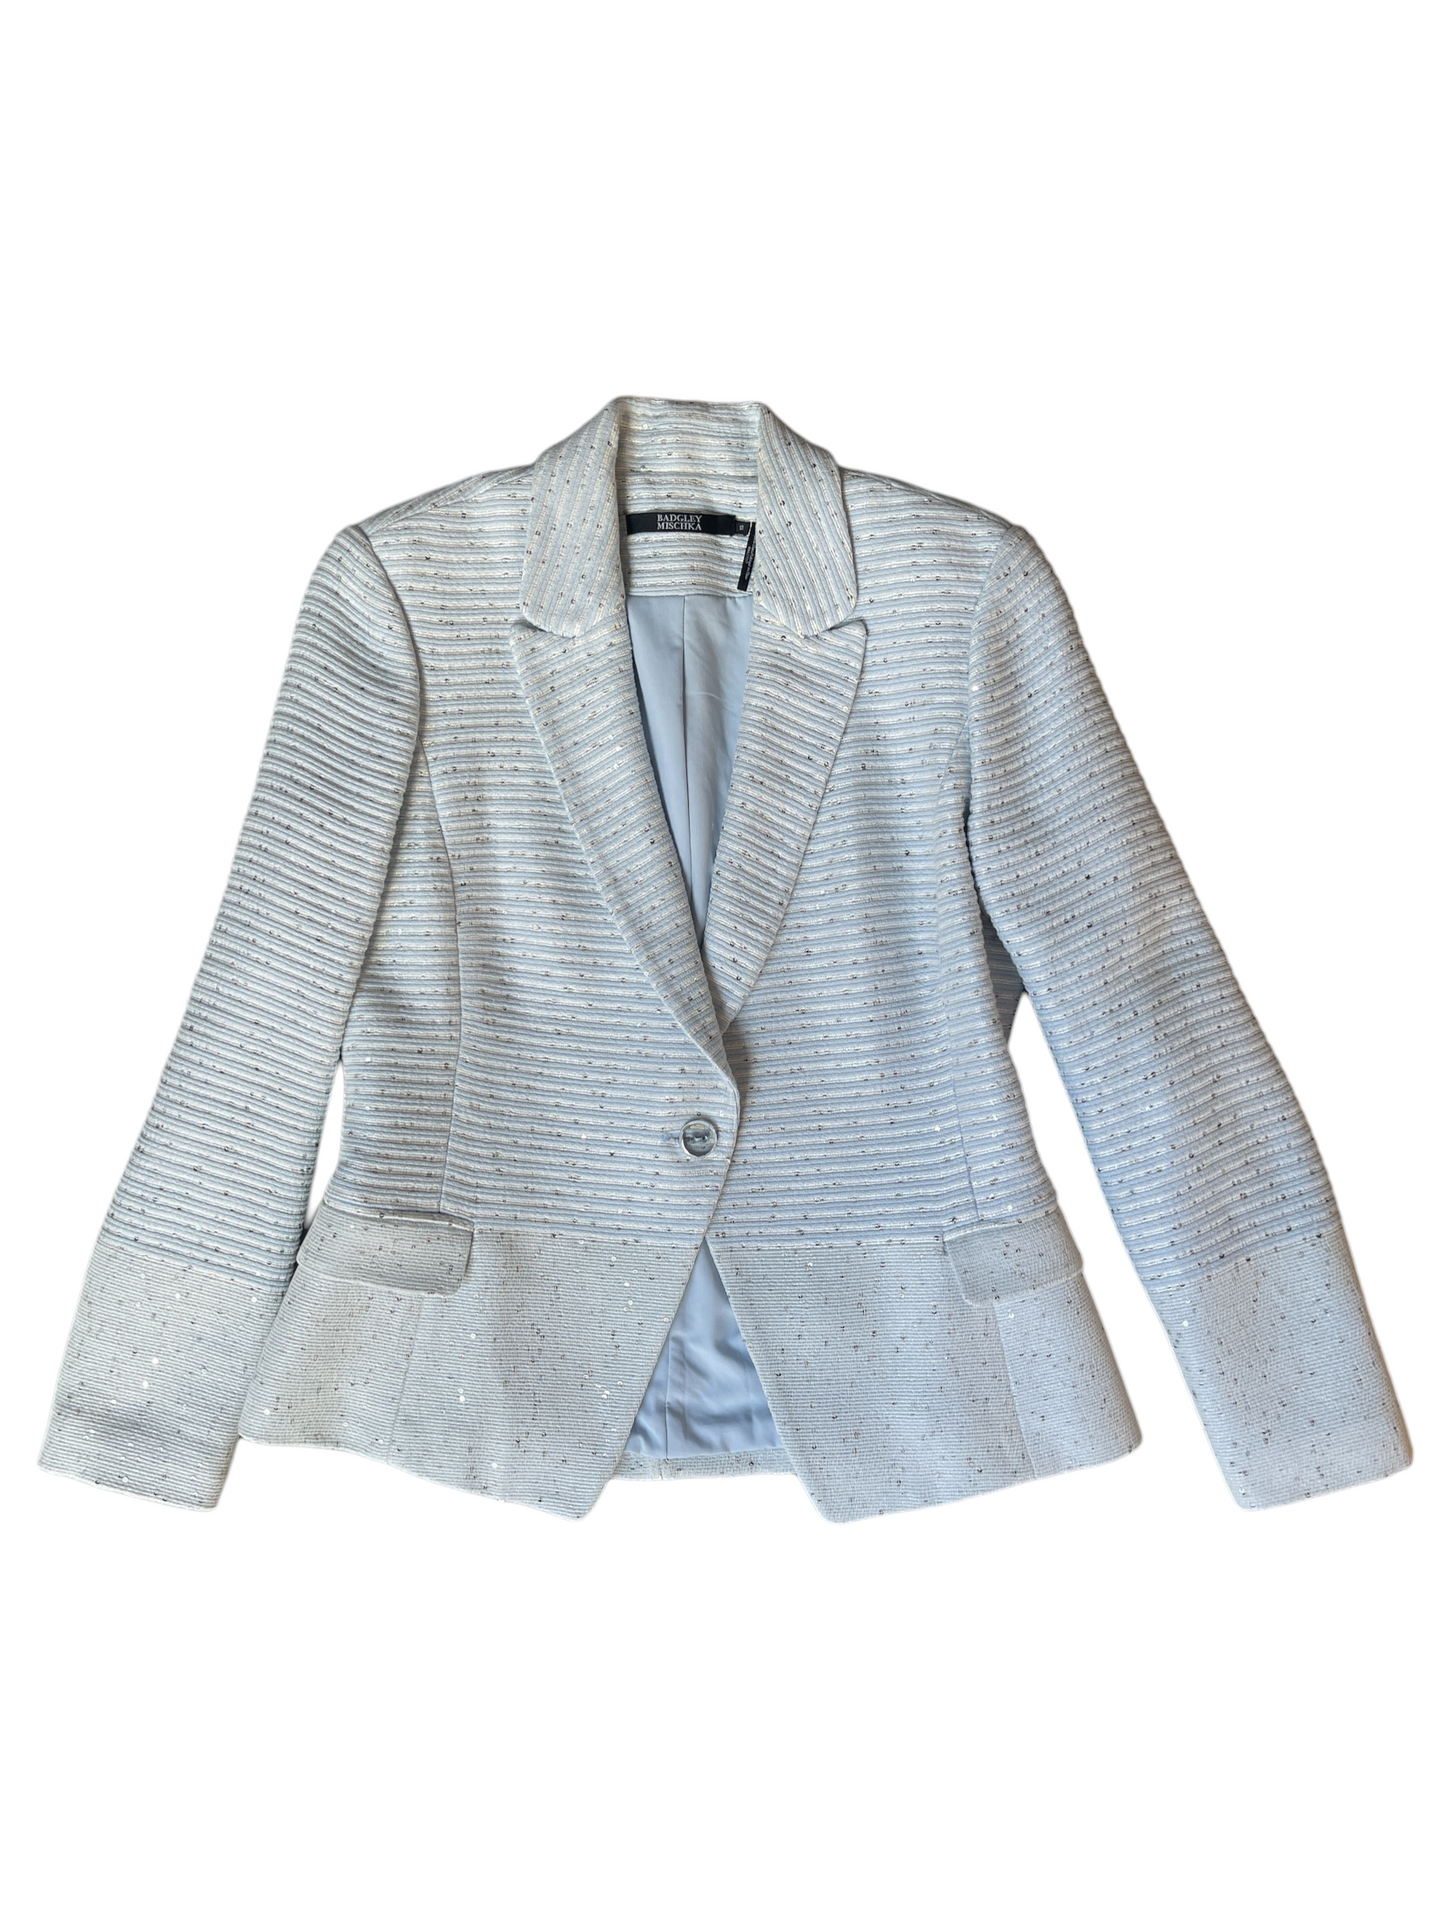 Badgley Mischka Baqby Blue & White With Sequence Dress And Blazer With Pockets Size Size 10